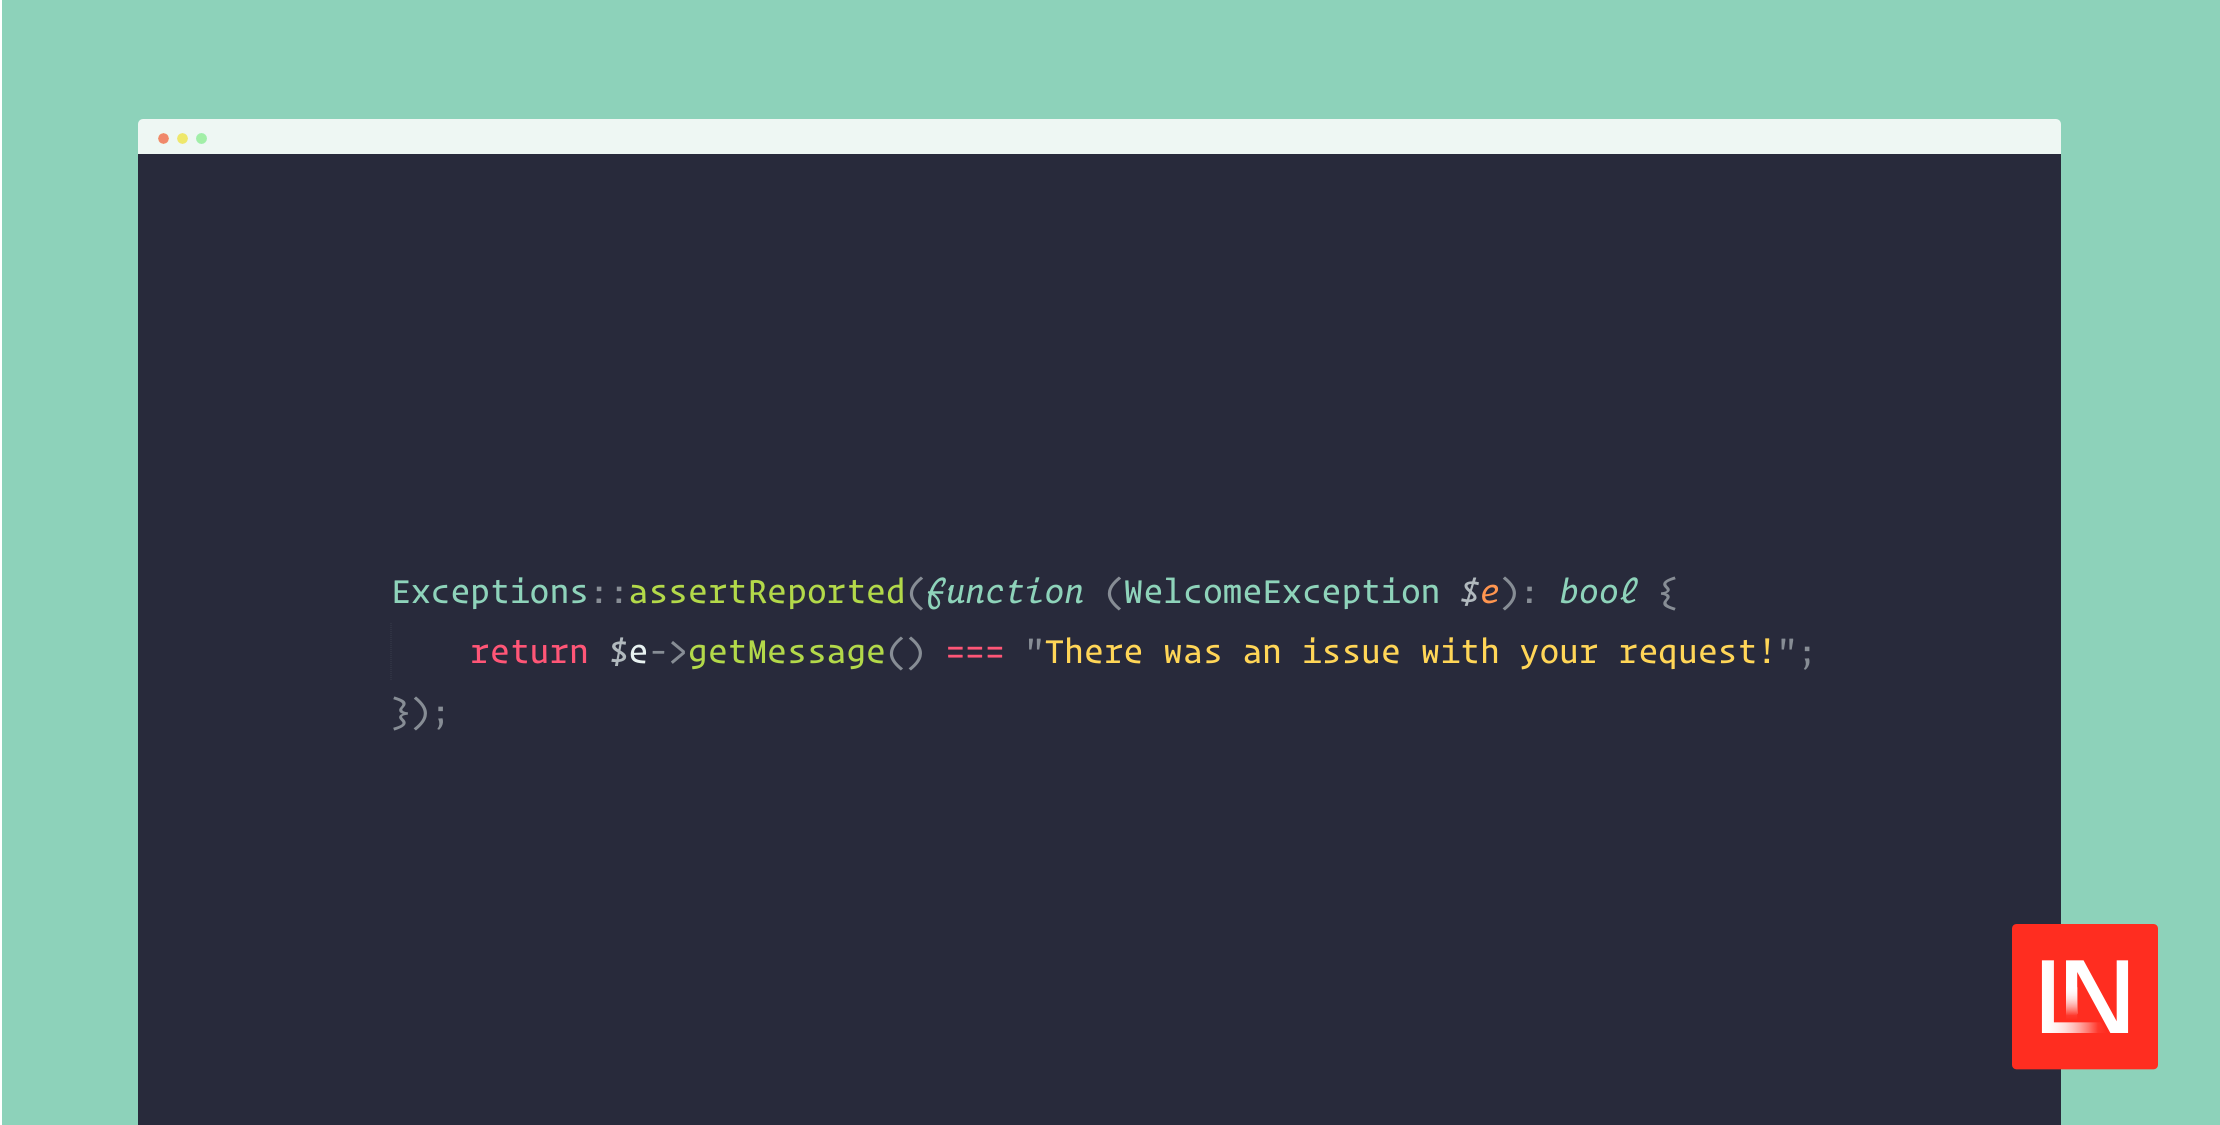 Laravel's recent release of Laravel 11.4 introduced the Exceptions facade, which adds conveniences around asserting exceptions in Laravel's exception 